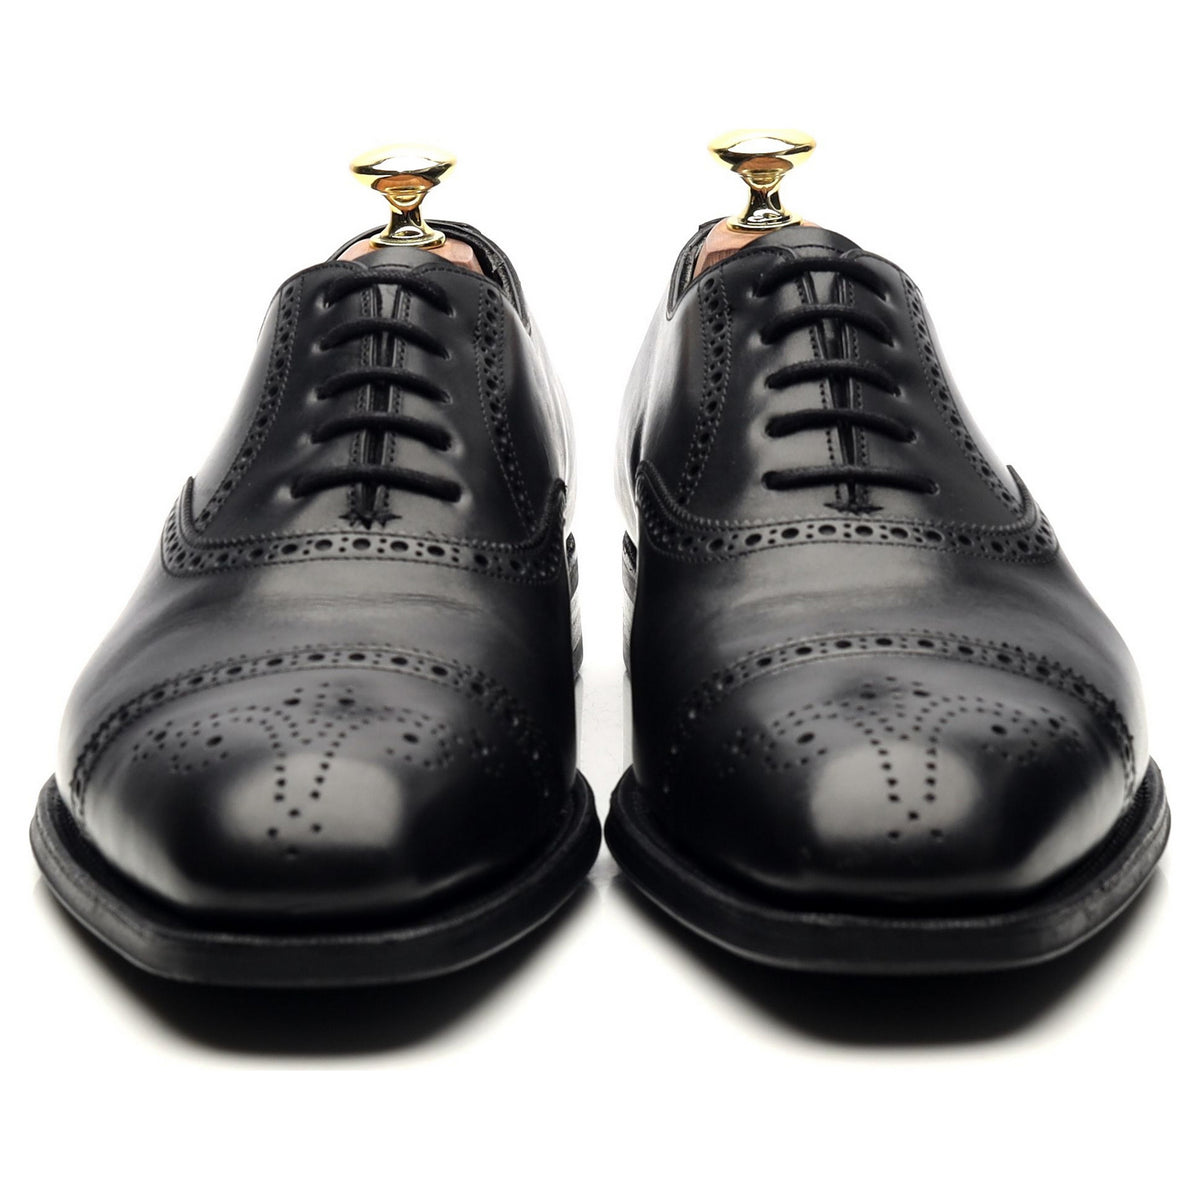 &#39;Asquith&#39; Black Leather Oxford Brogues UK 7 E